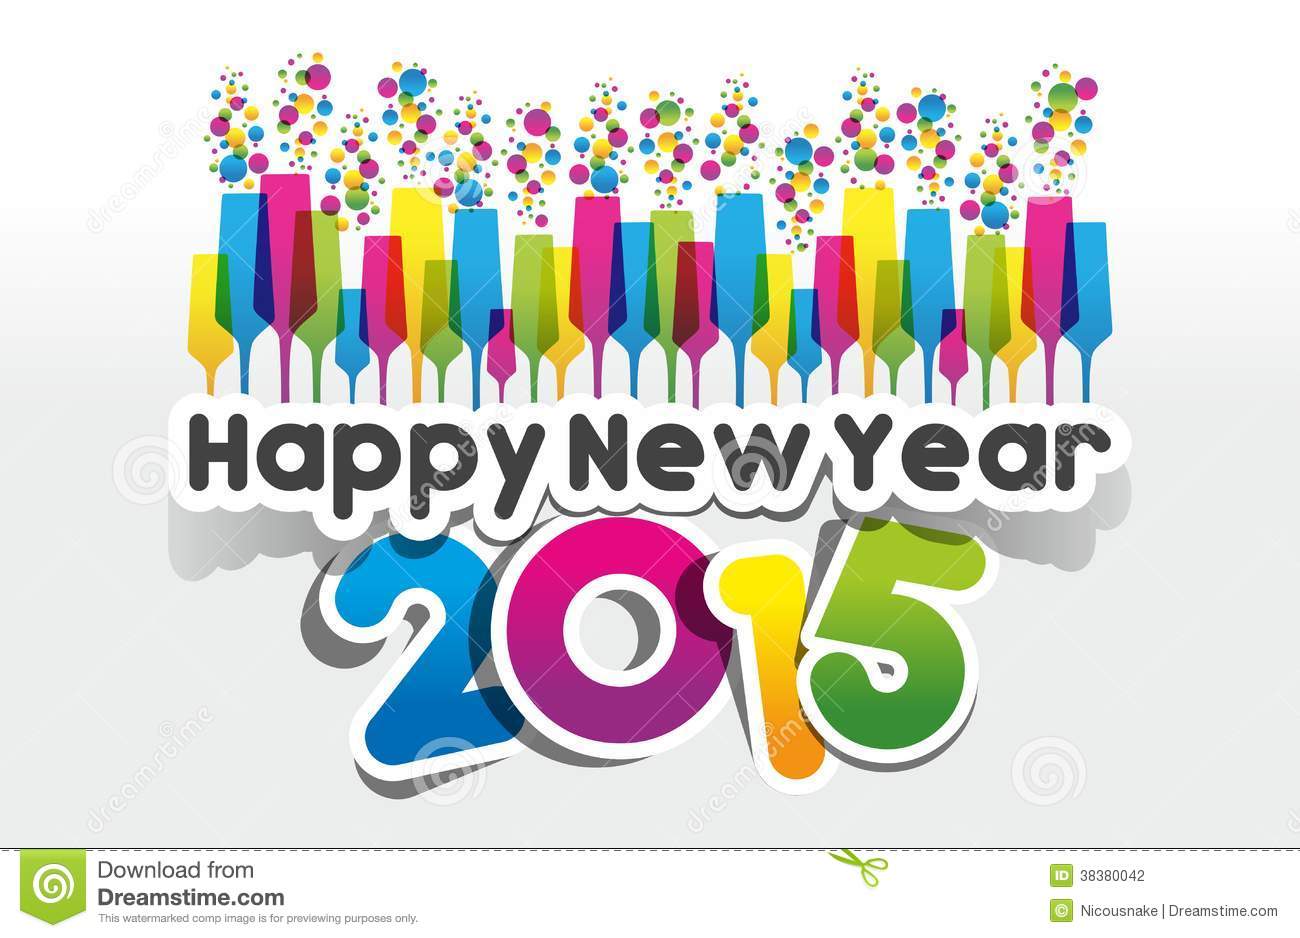 Happy New Year 2015 Greeting Card Stock Photography   Image  38380042